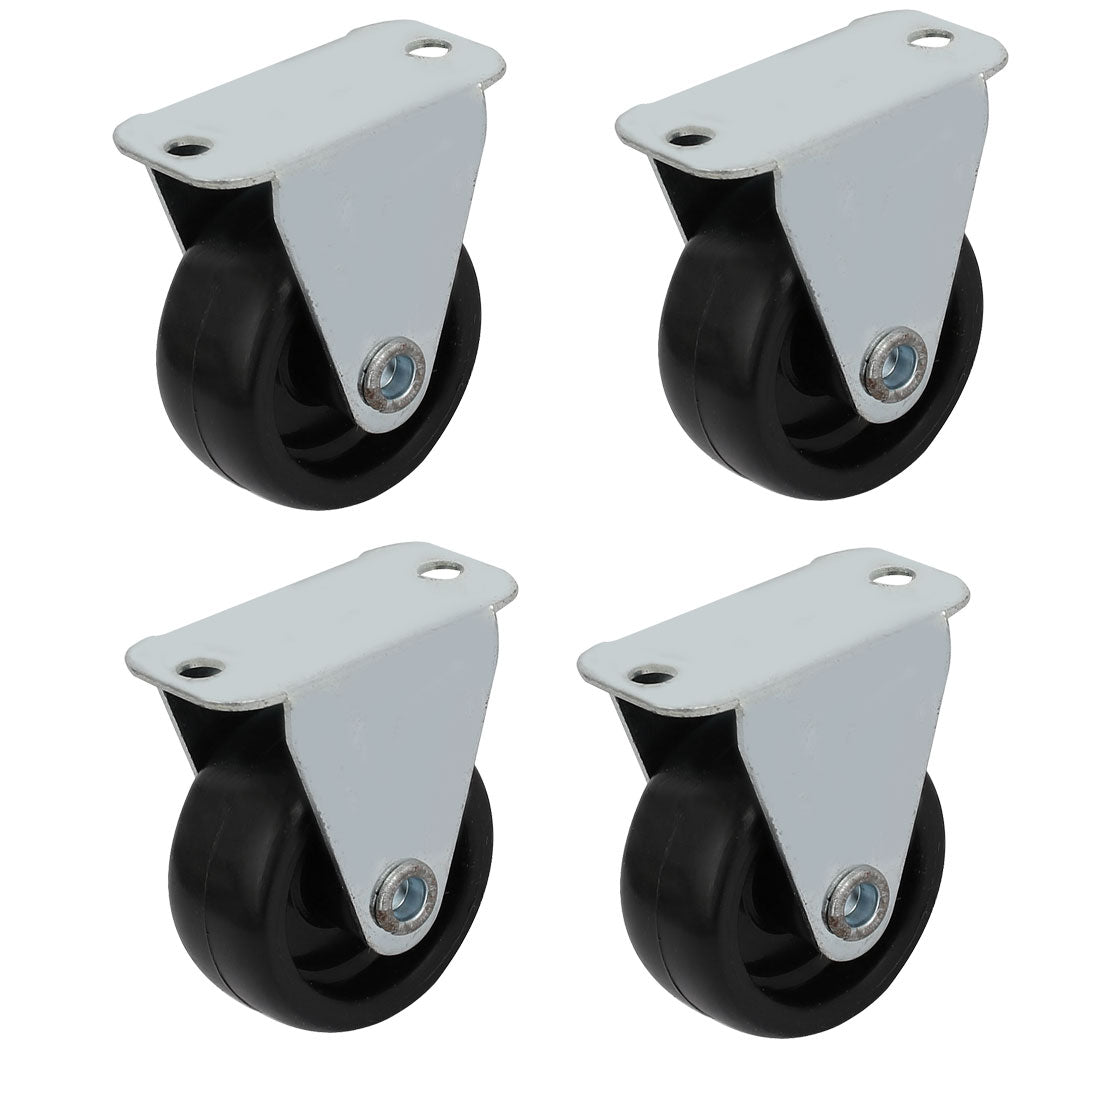 uxcell Uxcell 1.25-inch Diameter Wheel Rigid Top Plate Fixed Rolling Caster Roller Black 4pcs